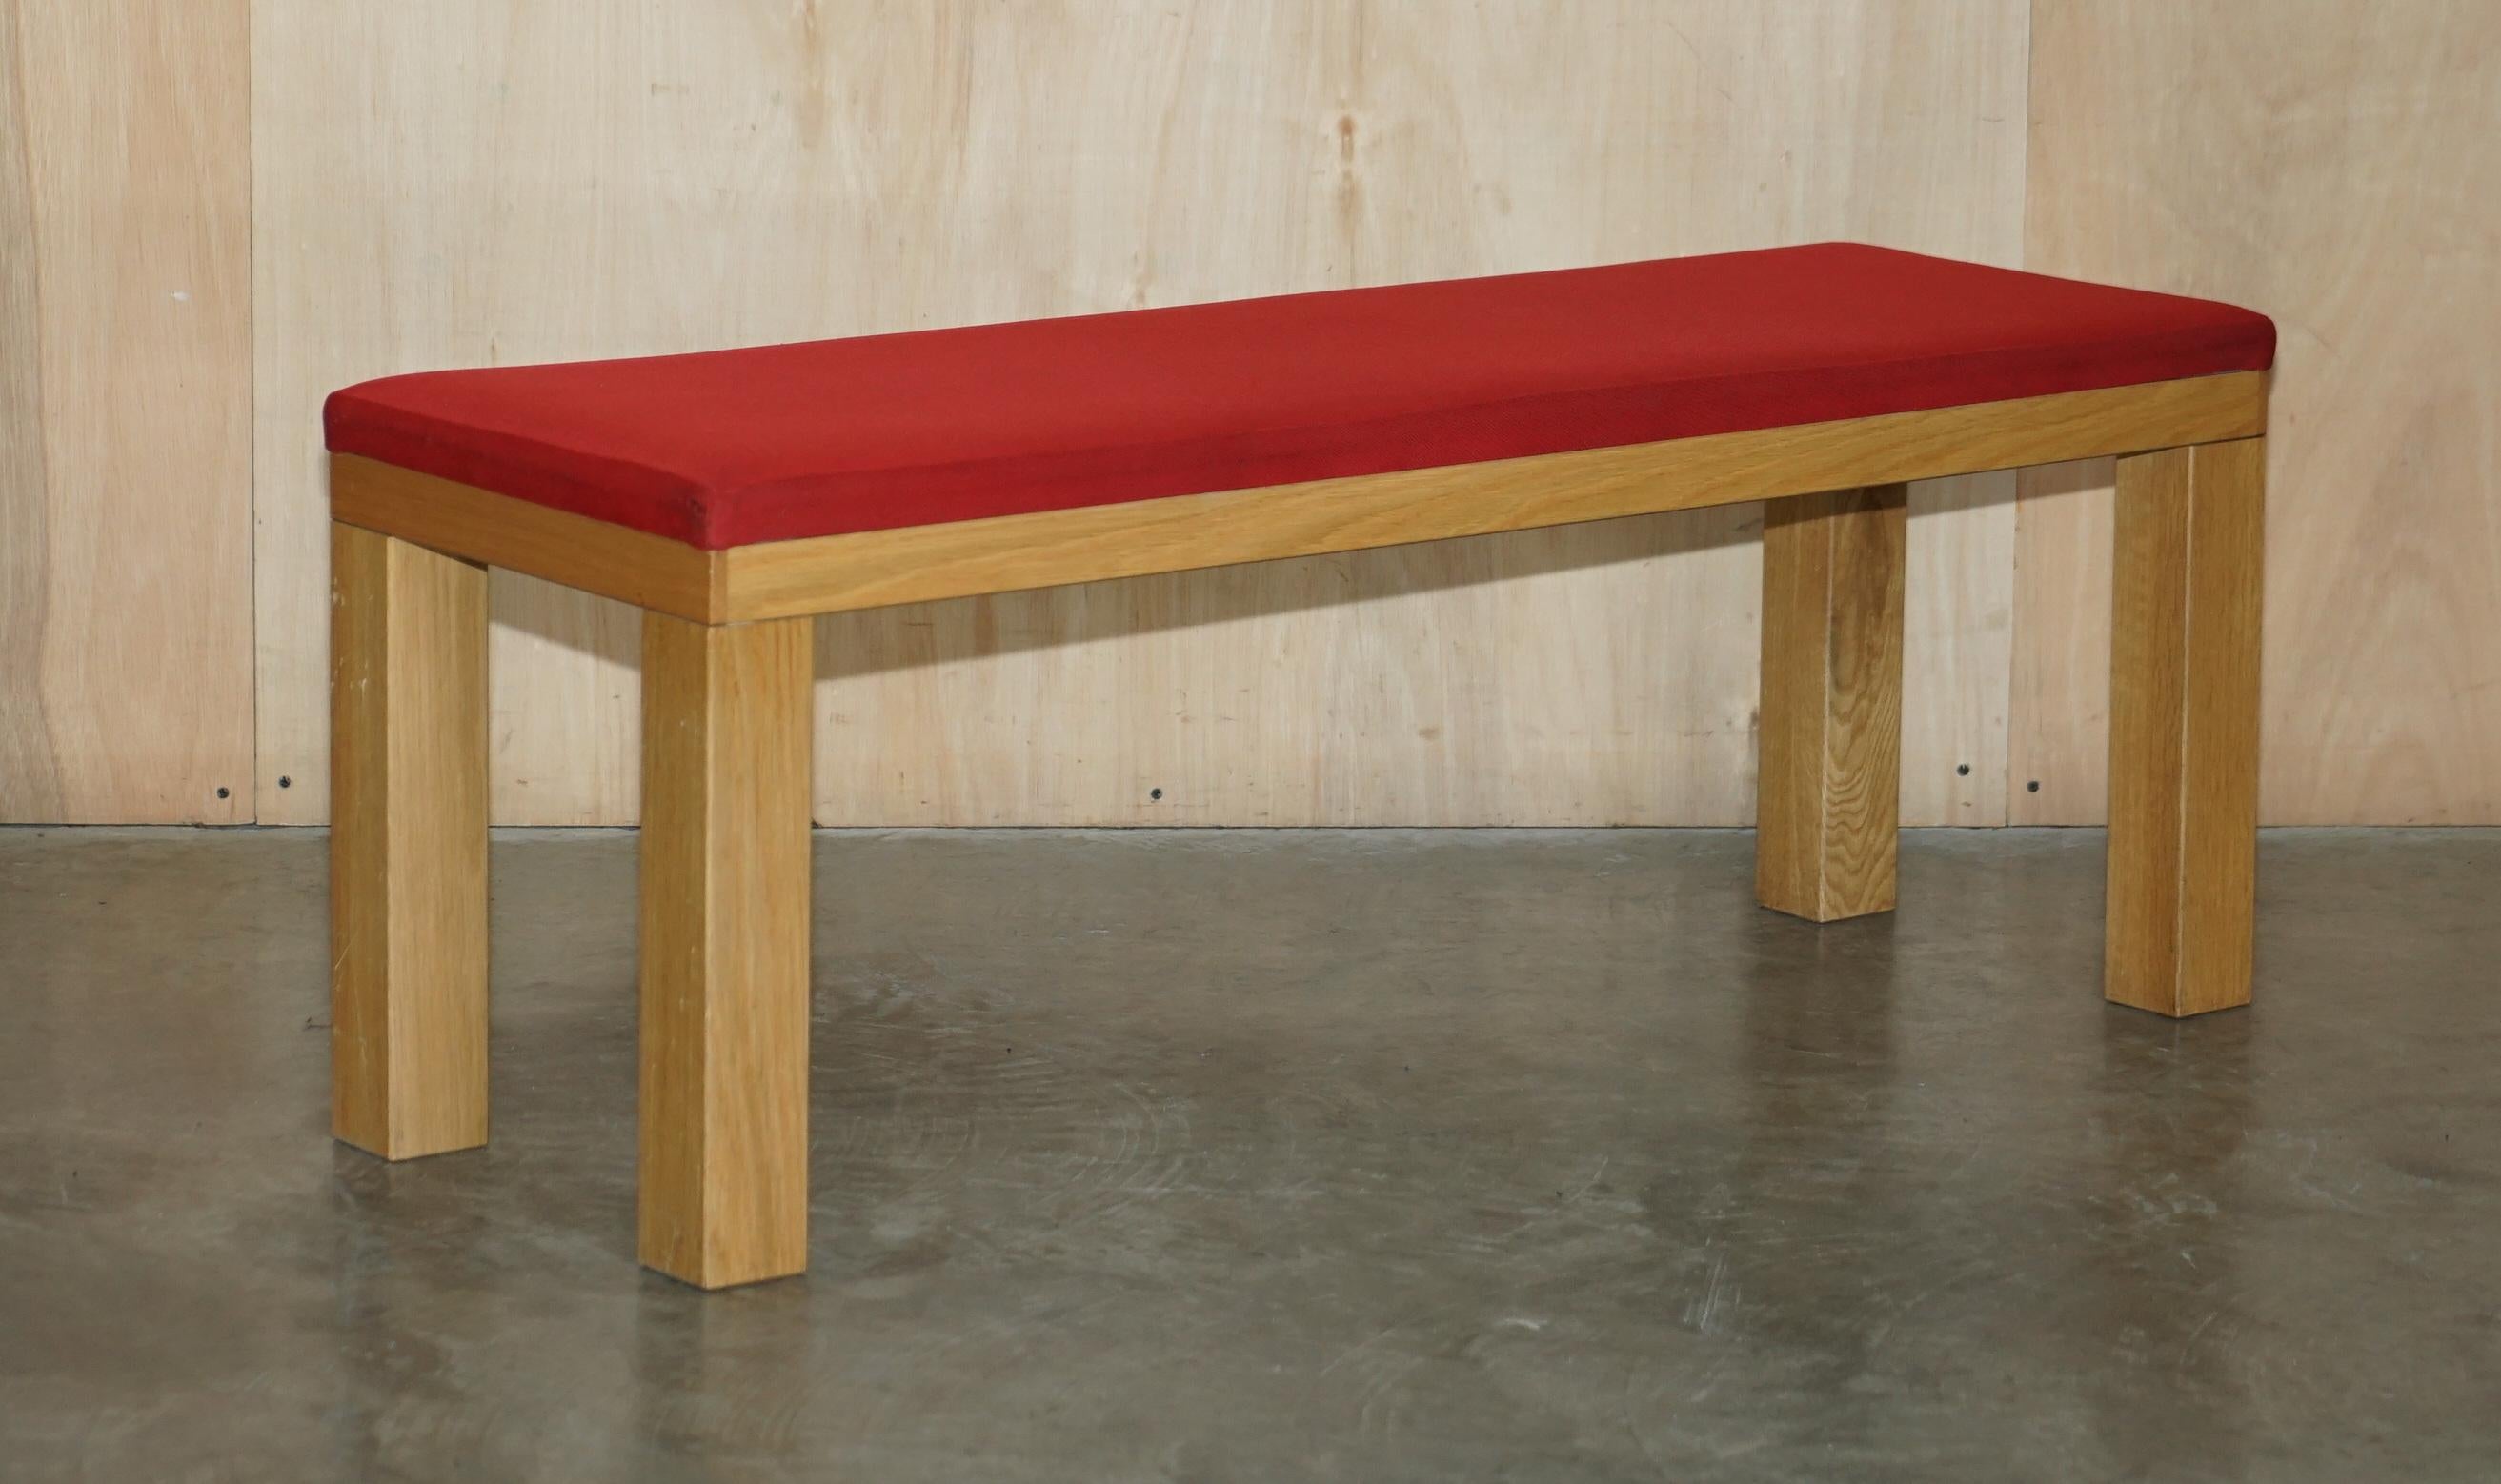 Country Rrp £1200 James Burleigh Red Large Kitchen Dining Table Bench Sizes & Colours For Sale